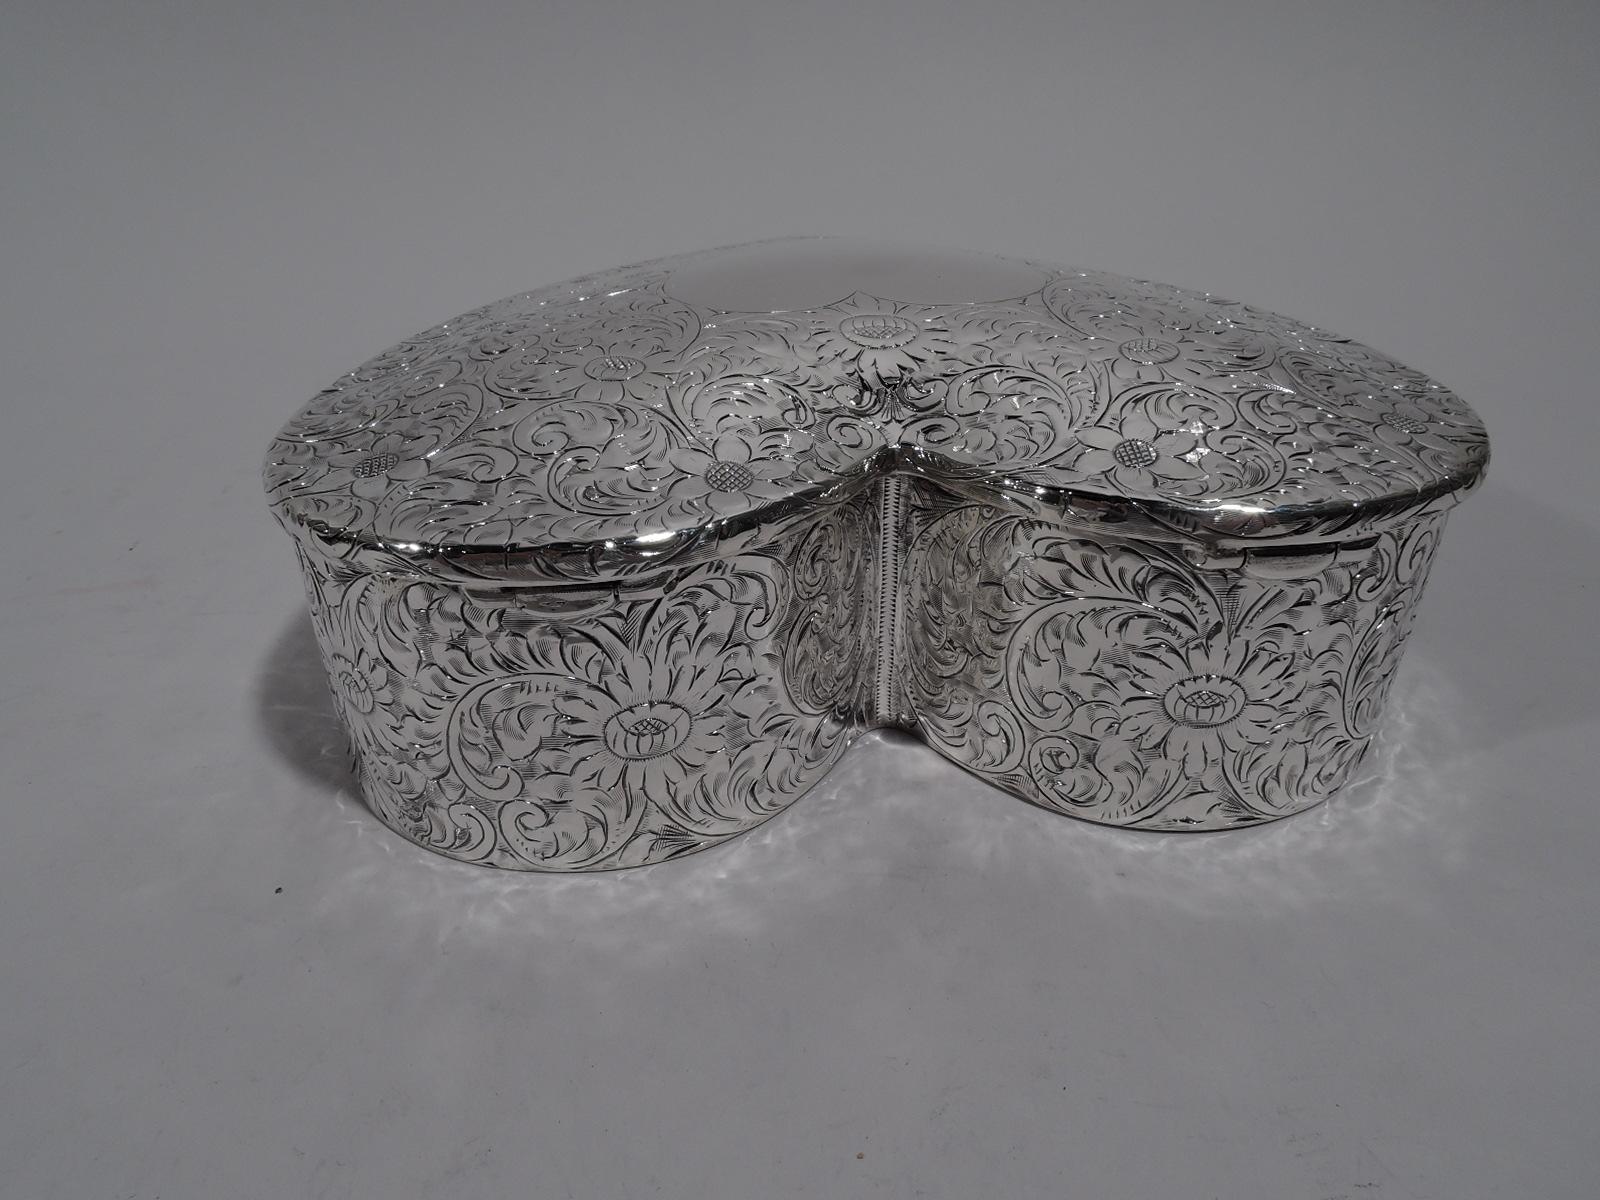 American Edwardian sterling silver jewelry box. Heart-form. Cover hinged and gently raised. Dense all-over engraved flowers including daisies. Turn-of-the-century flower power to convey a special message. Cover has vacant cartouche for spelling it